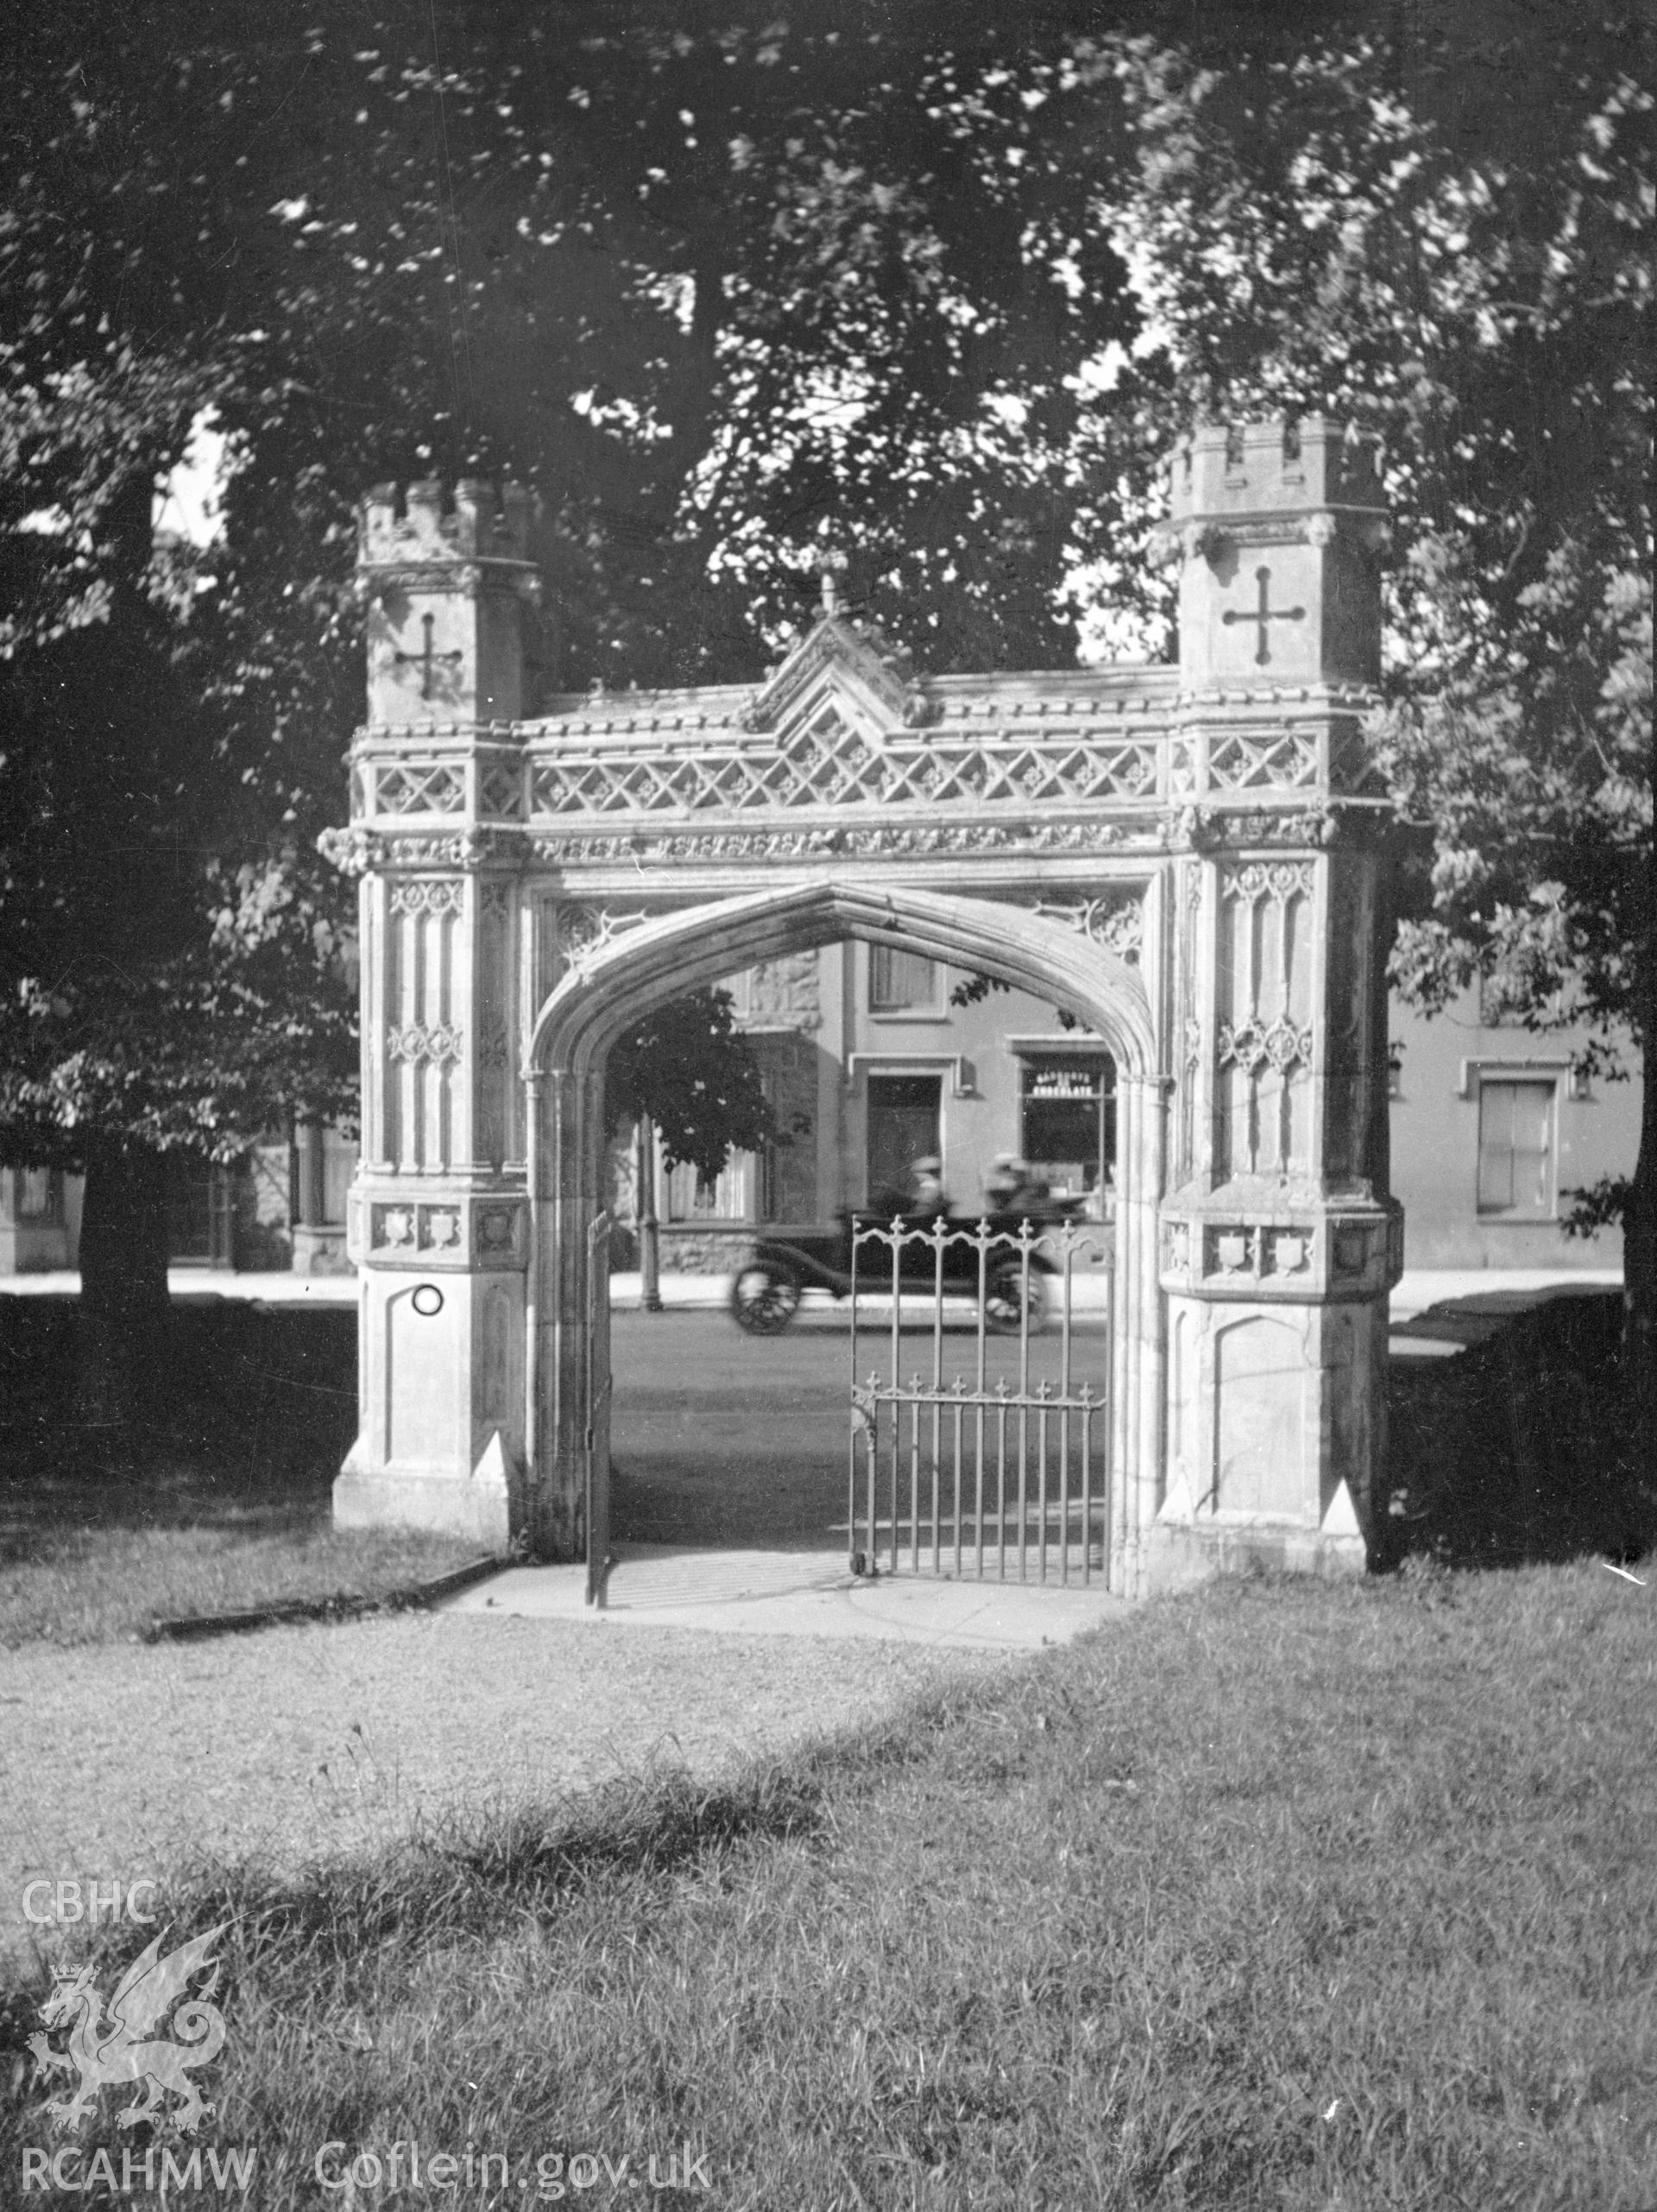 Digital copy of a nitrate negative showing the gate at Tremadog Church